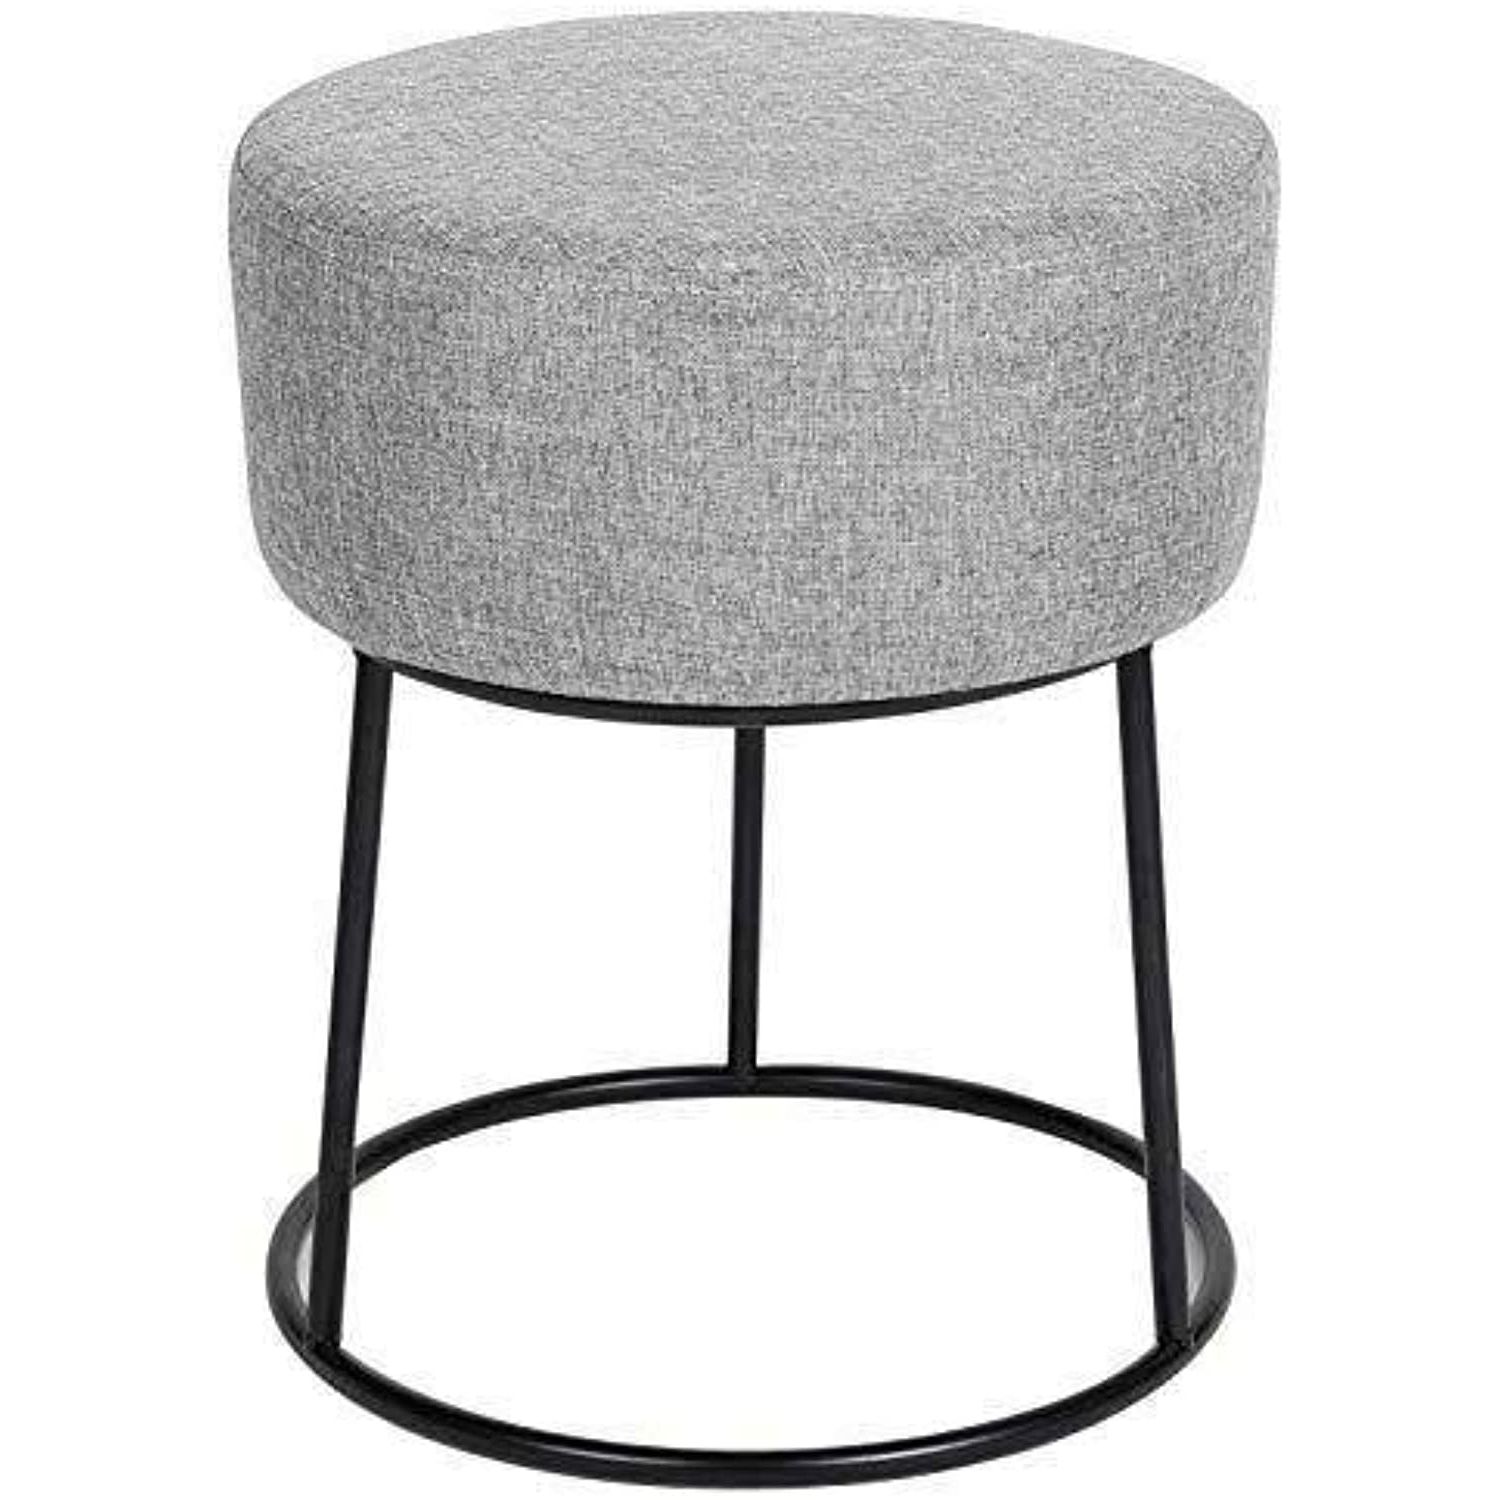 Cream Linen And Fir Wood Round Ottomans Within Recent Amazon: Grey Linen Foot Stool Ottoman – Soft Compact Round Padded (View 8 of 10)